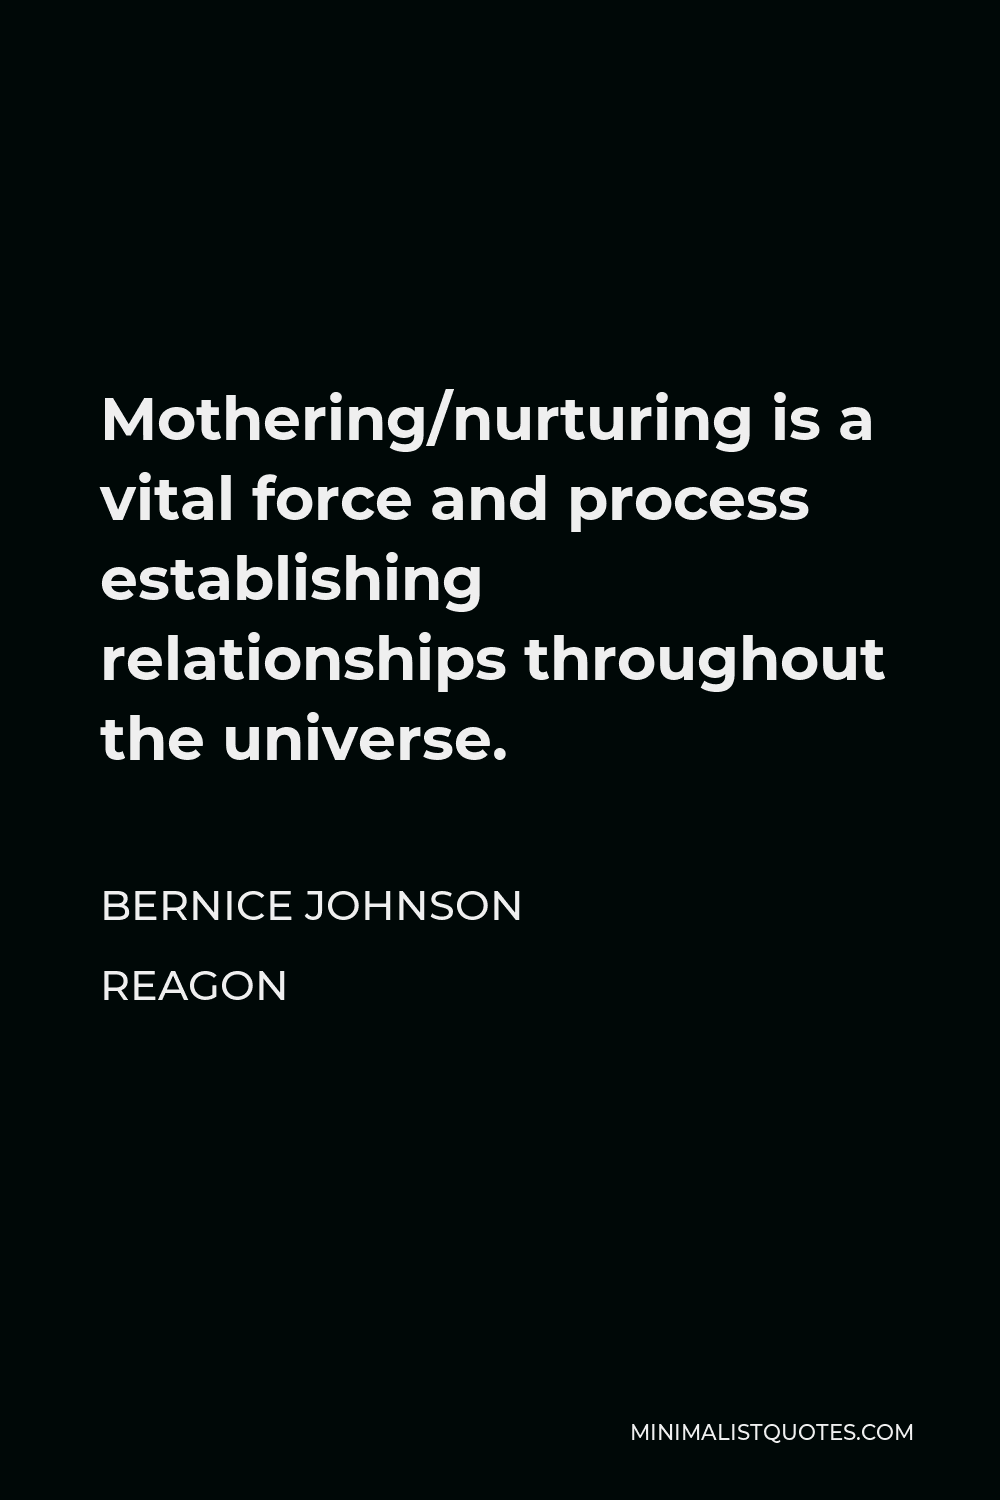 Bernice Johnson Reagon Quote - Mothering/nurturing is a vital force and process establishing relationships throughout the universe.